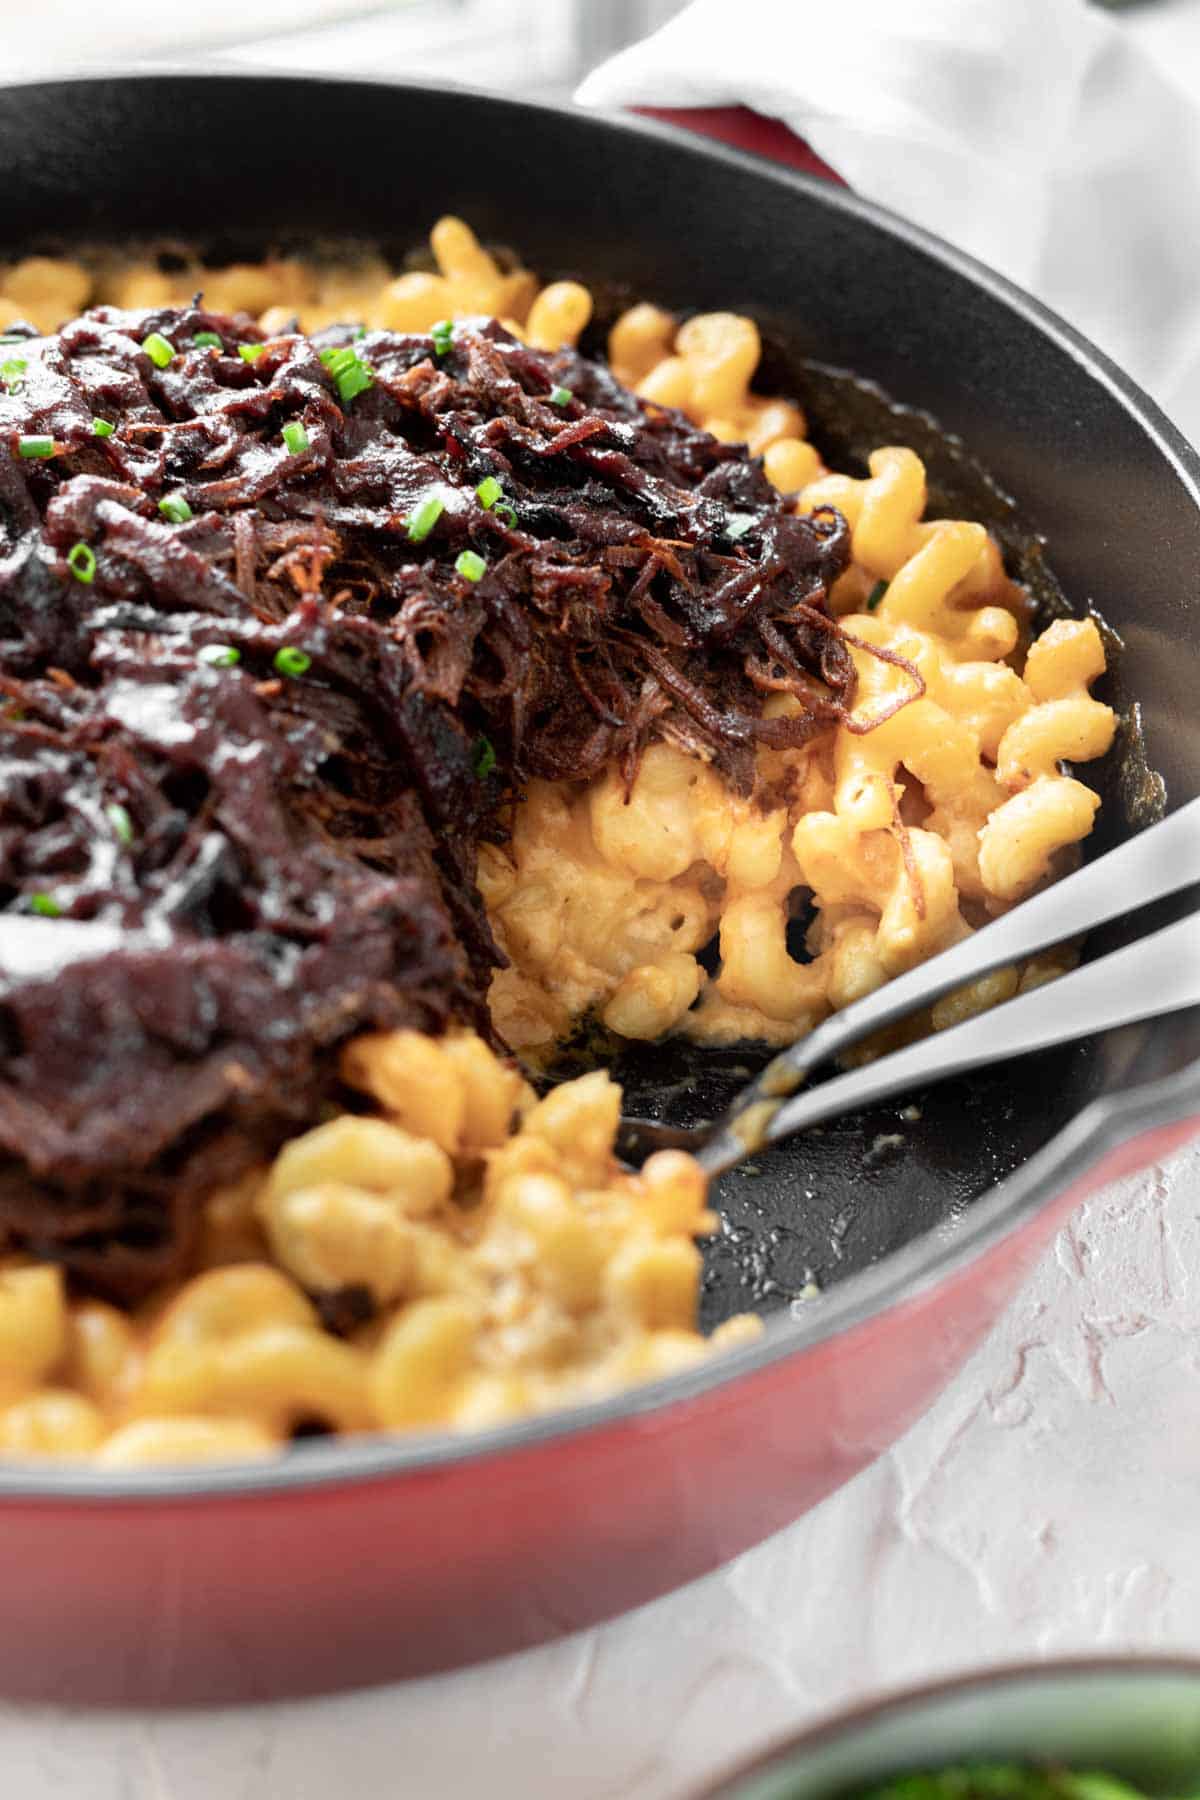 A closeup view of the cheesy noodles and the BBQ brisket in a cast iron skillet.